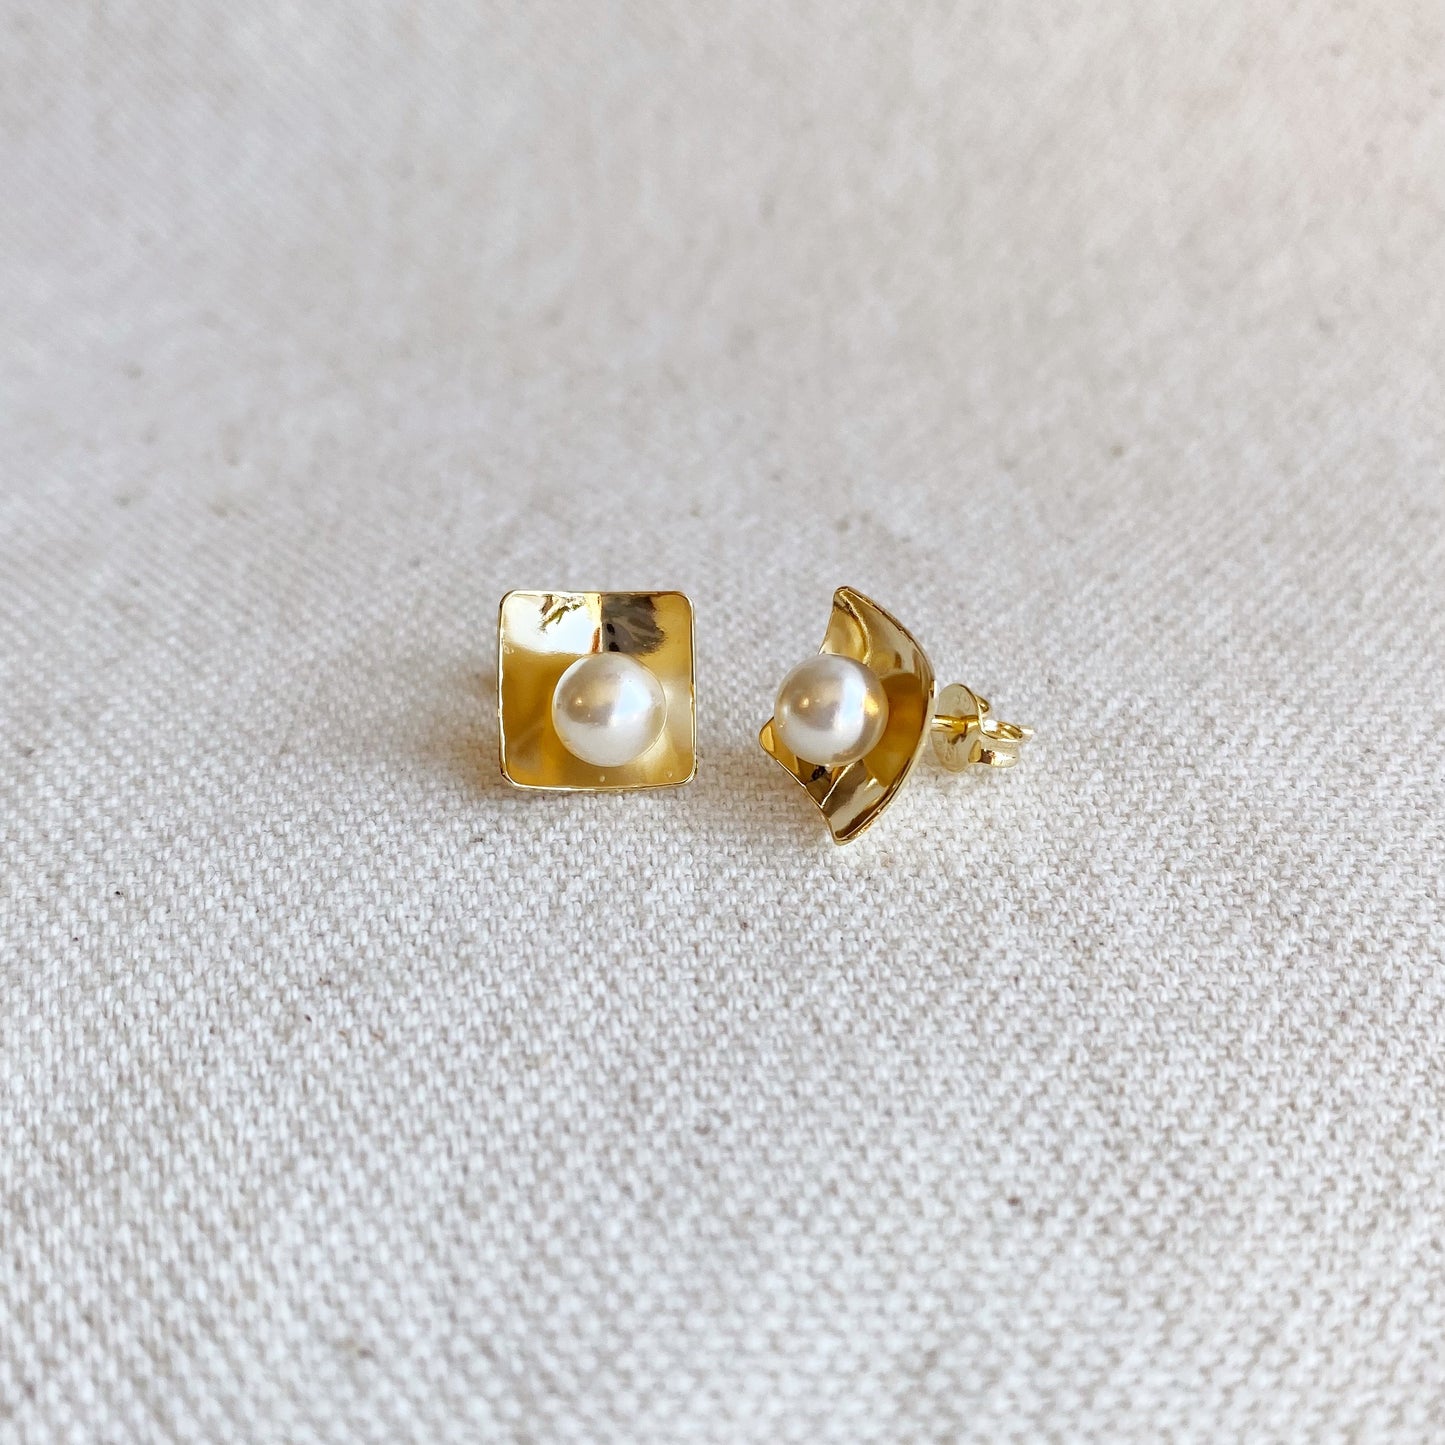 18k Gold Filled Pearl Stud Earrings In A Square Plate